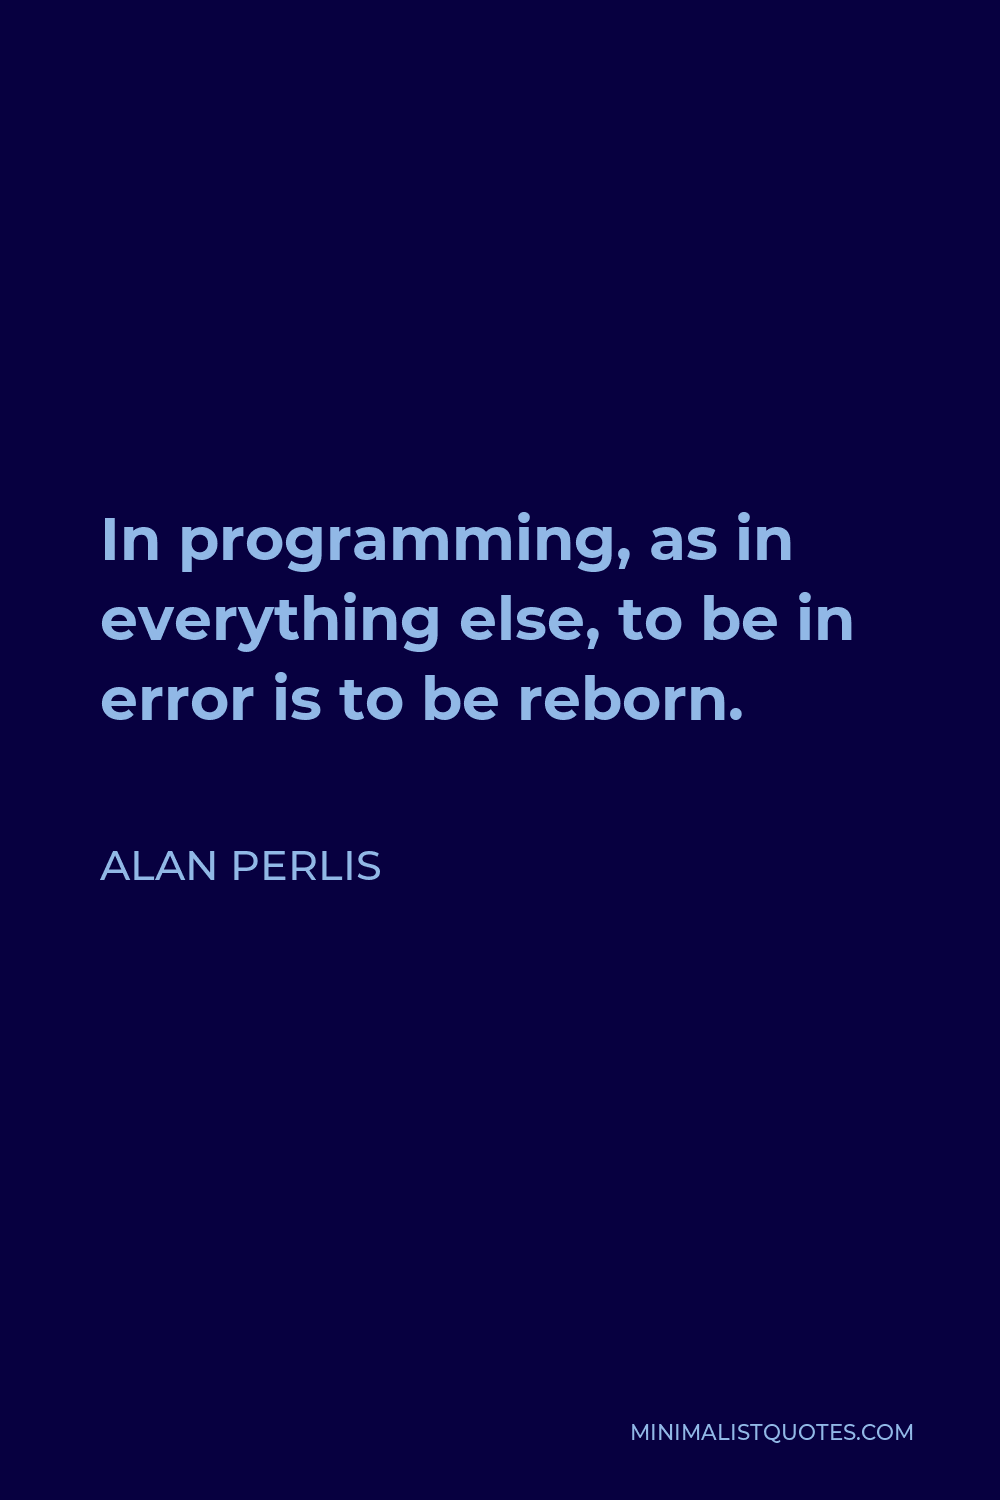 Alan Perlis Quote - In programming, as in everything else, to be in error is to be reborn.